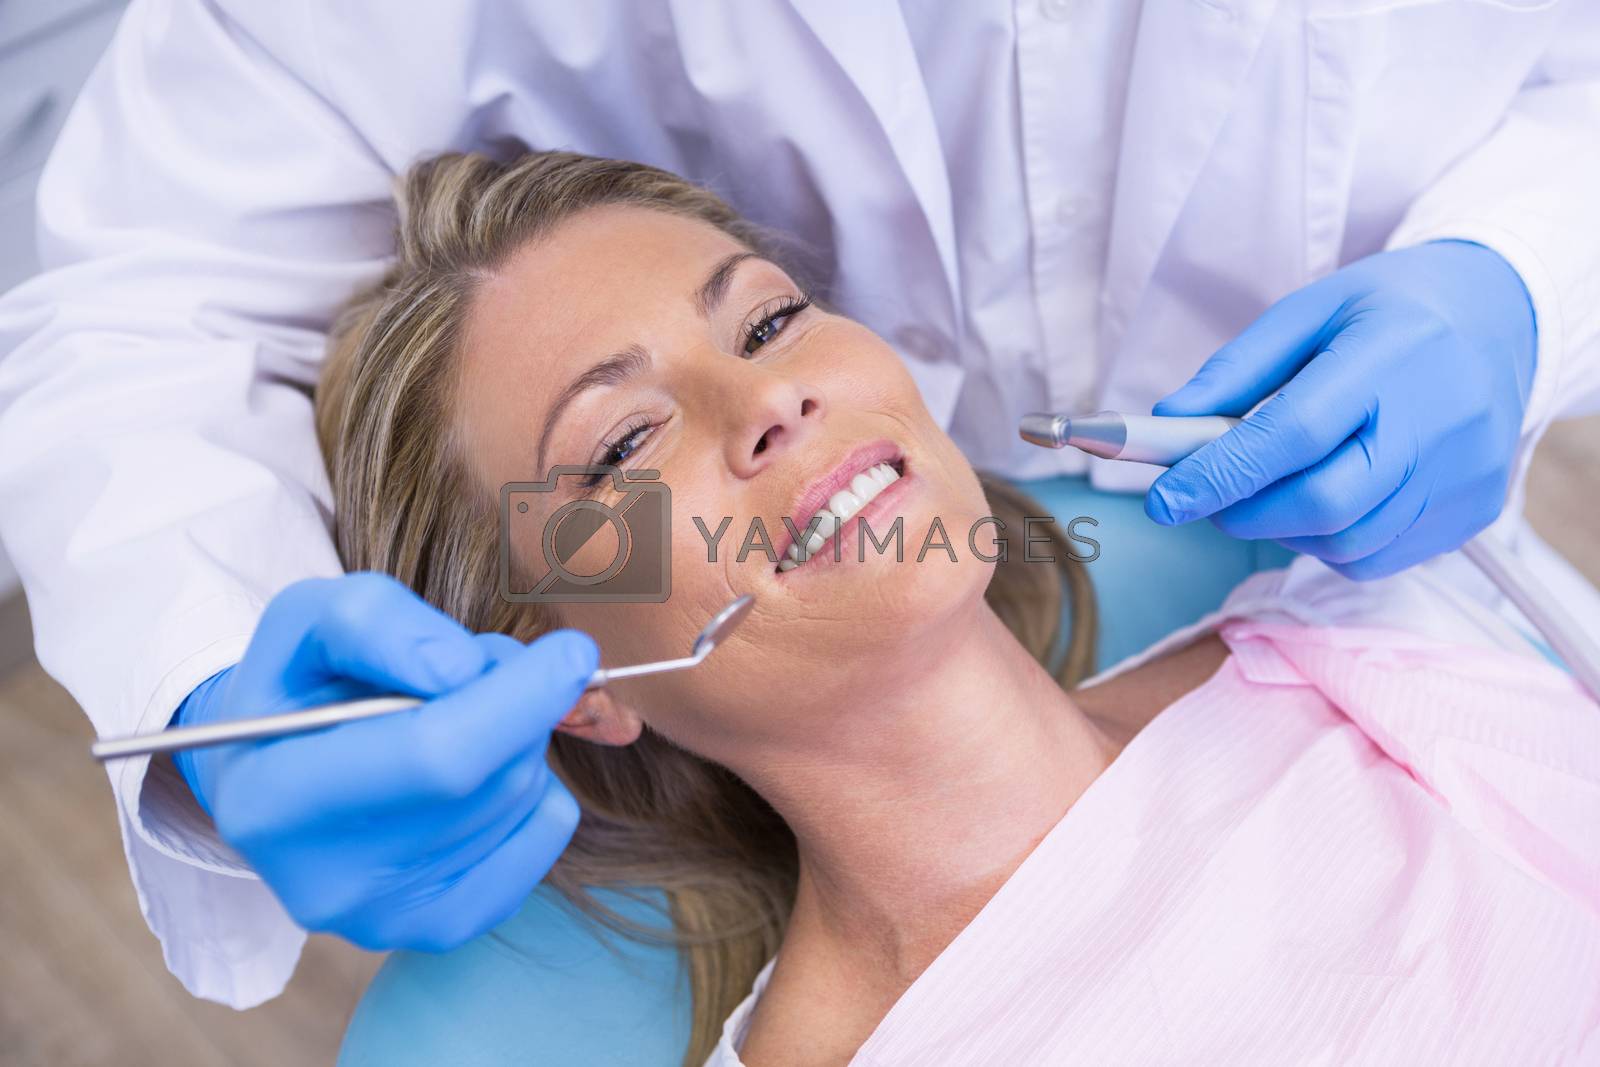 Royalty free image of High angle portrait of woman by dentist dolding tool by Wavebreakmedia